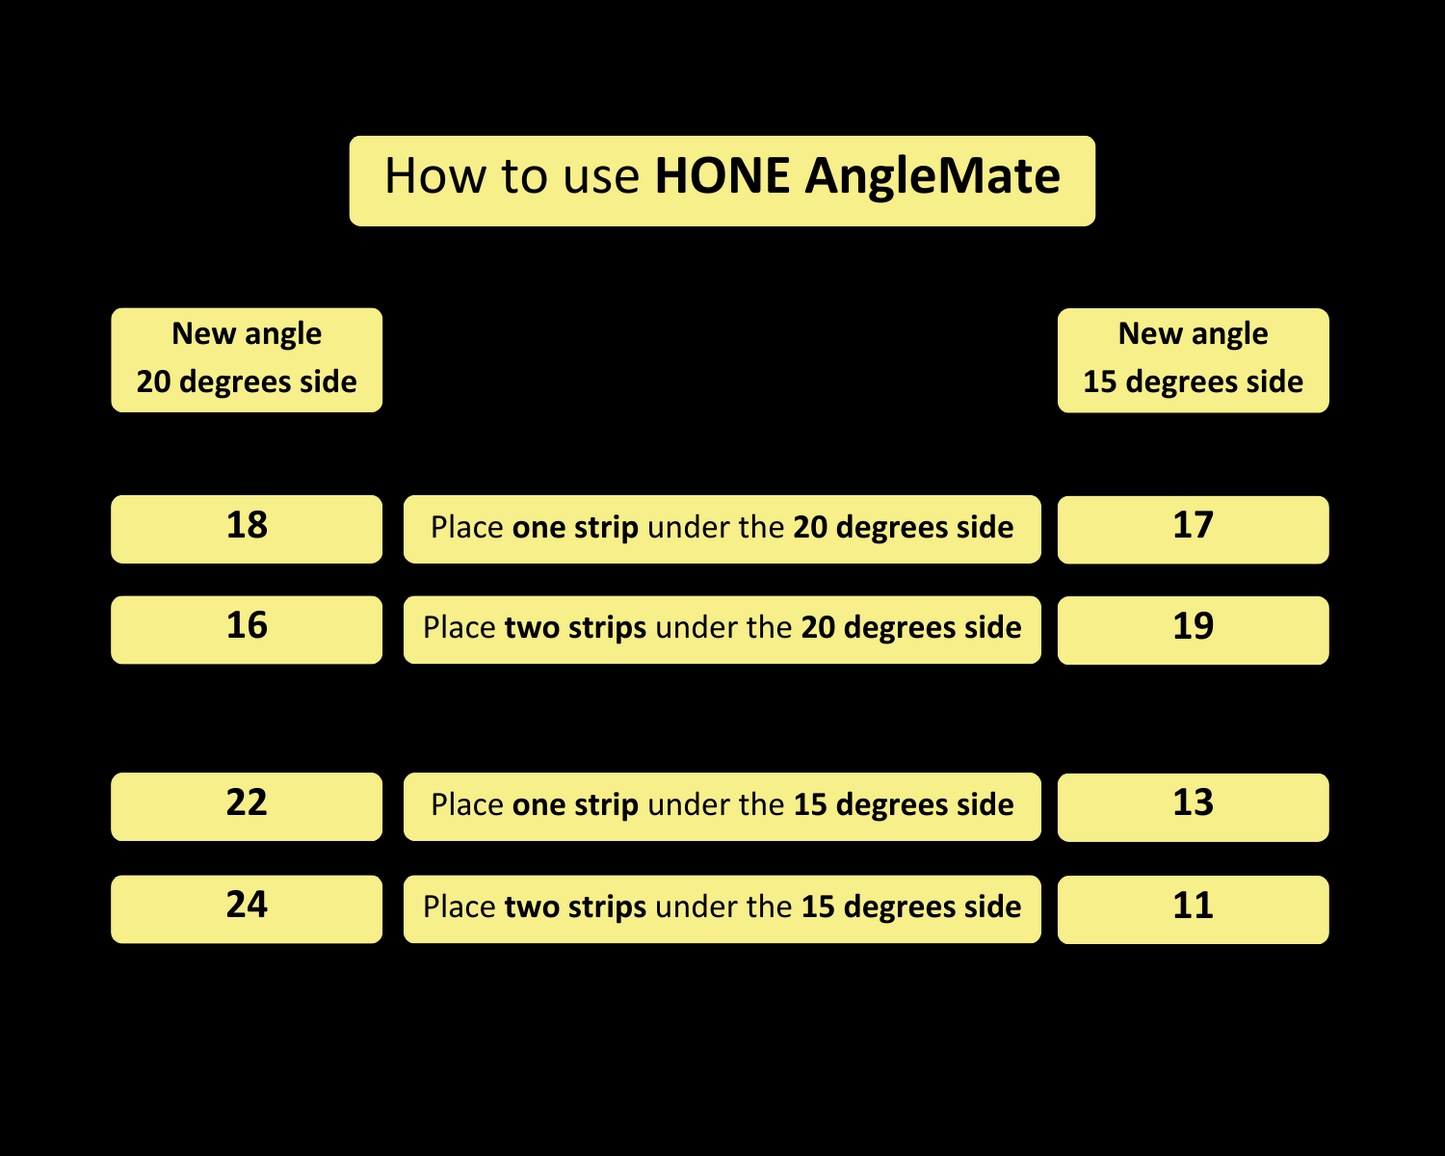 HONE AngleMate (Knife Holder shown for display only, not included in the package)